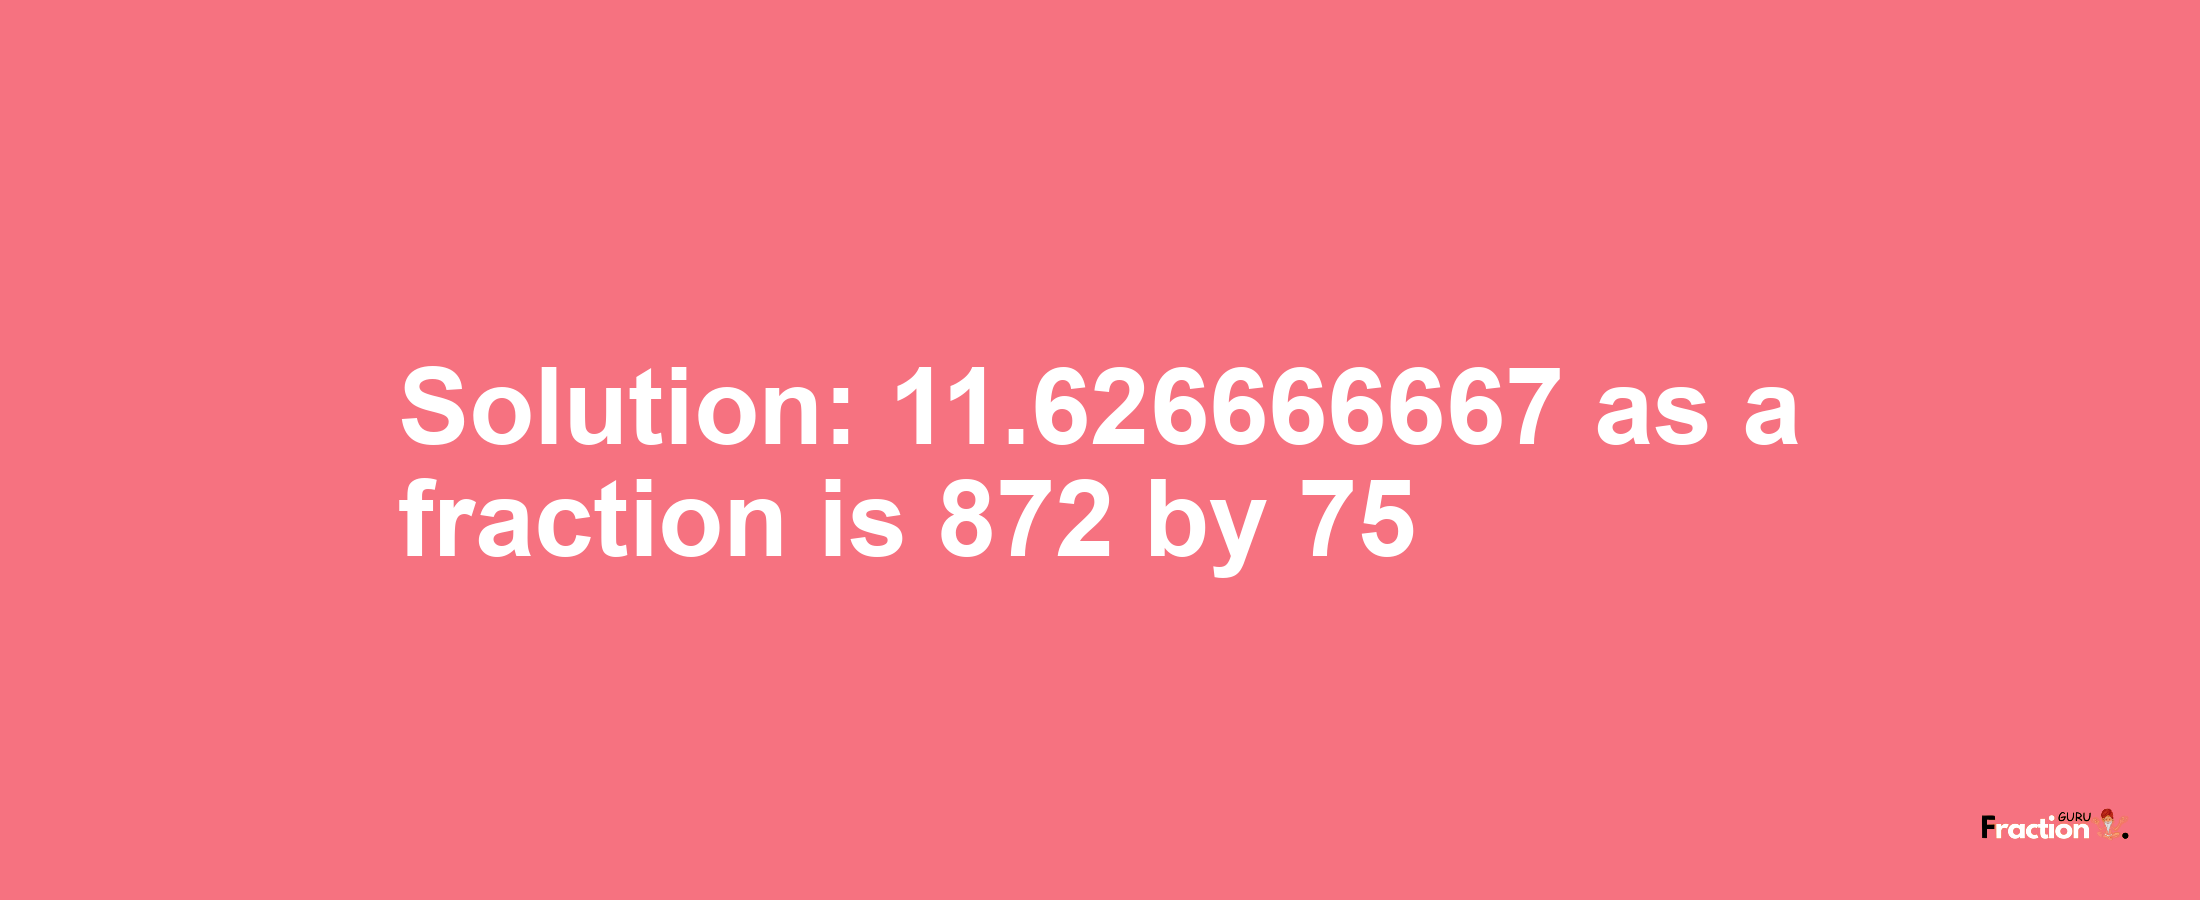 Solution:11.626666667 as a fraction is 872/75